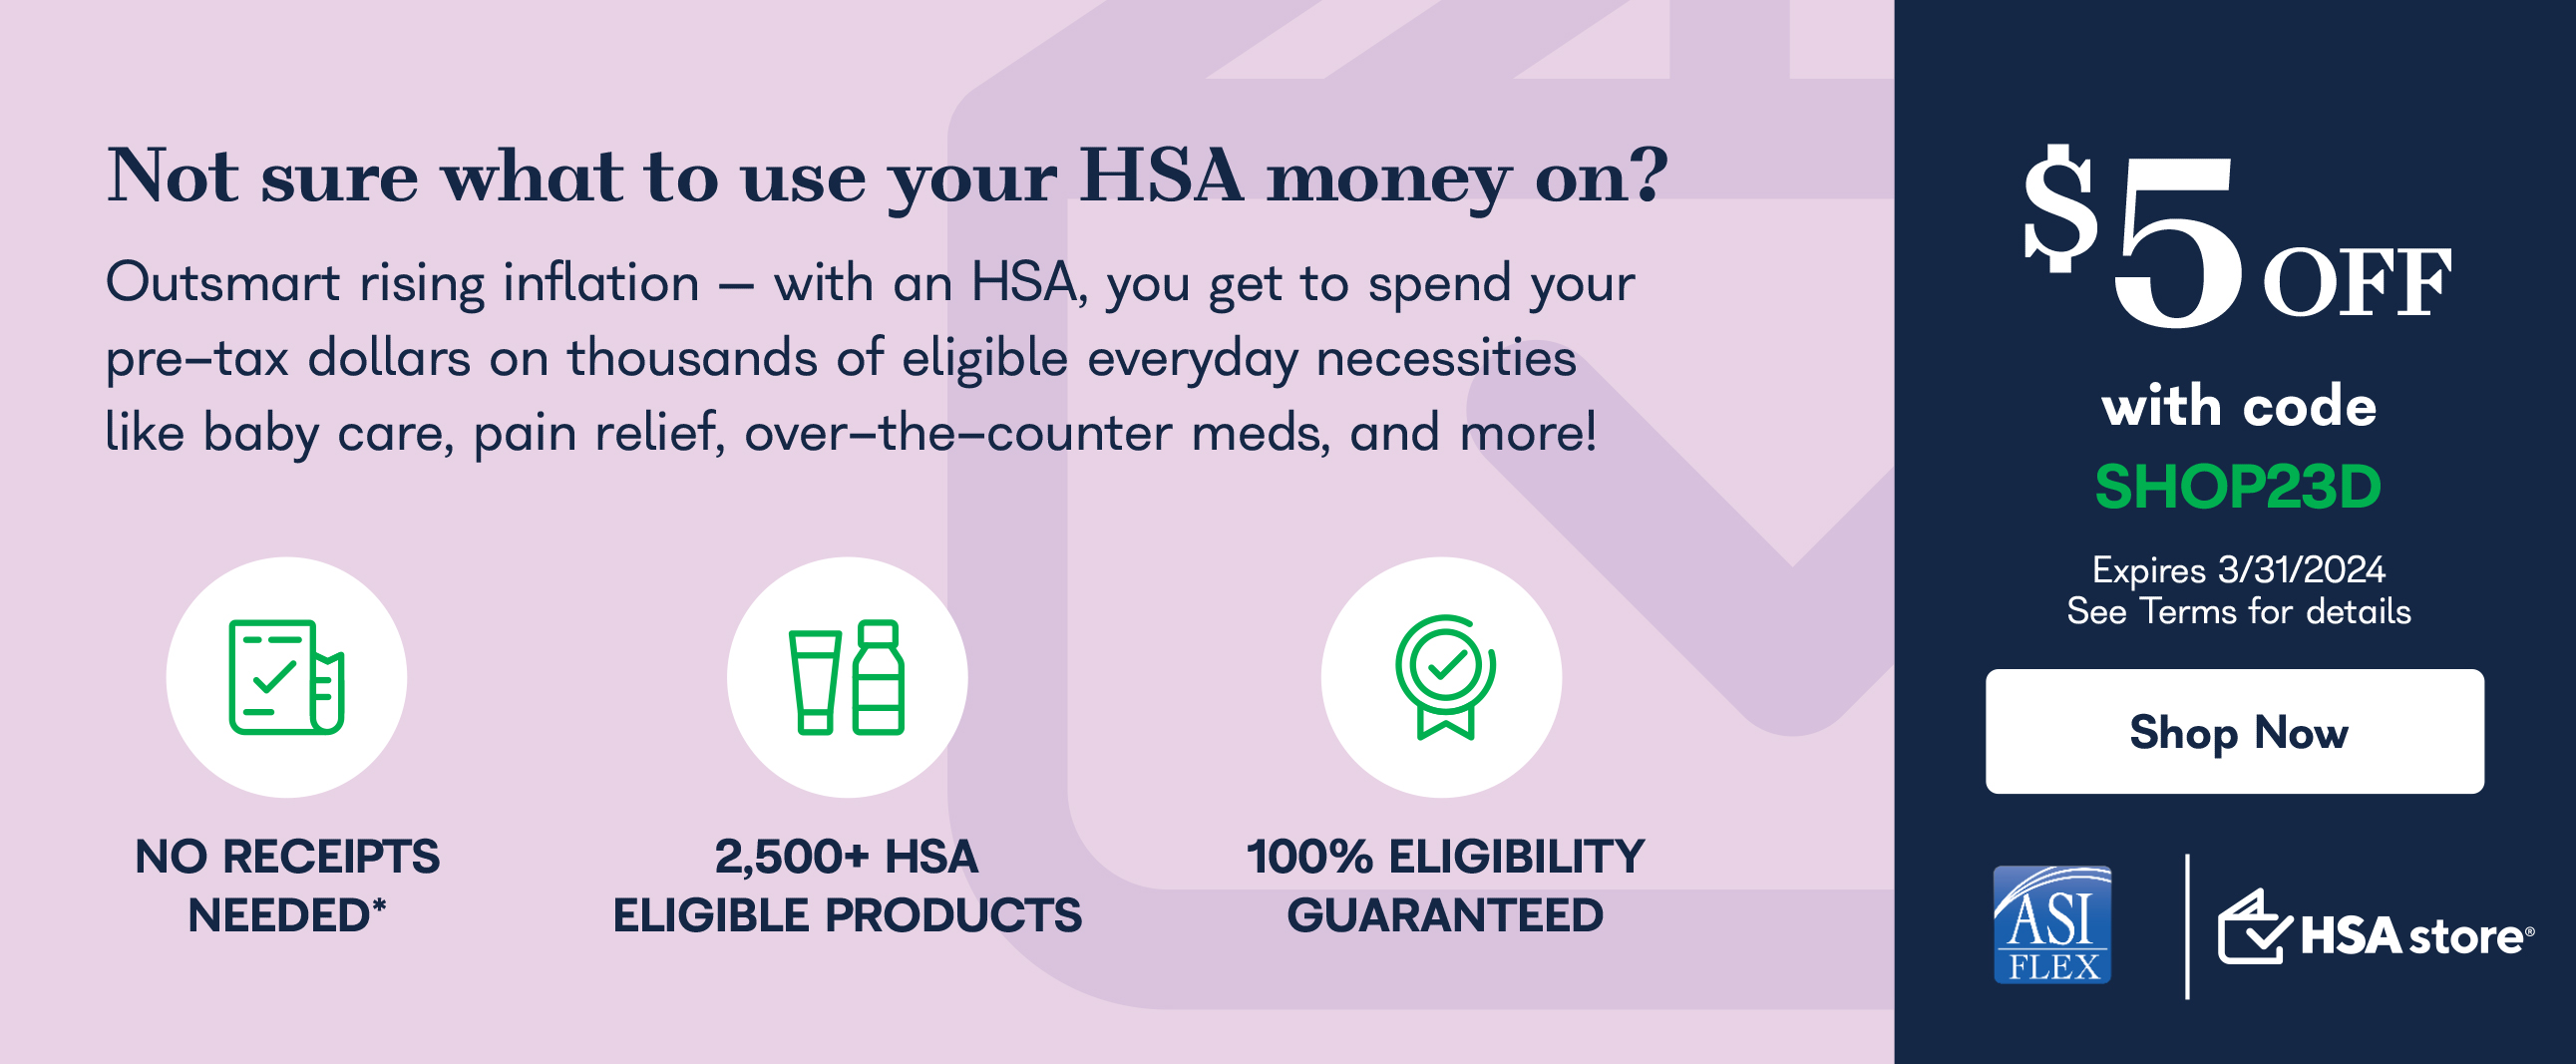 Use your expiring FSA dollars on these 3 items